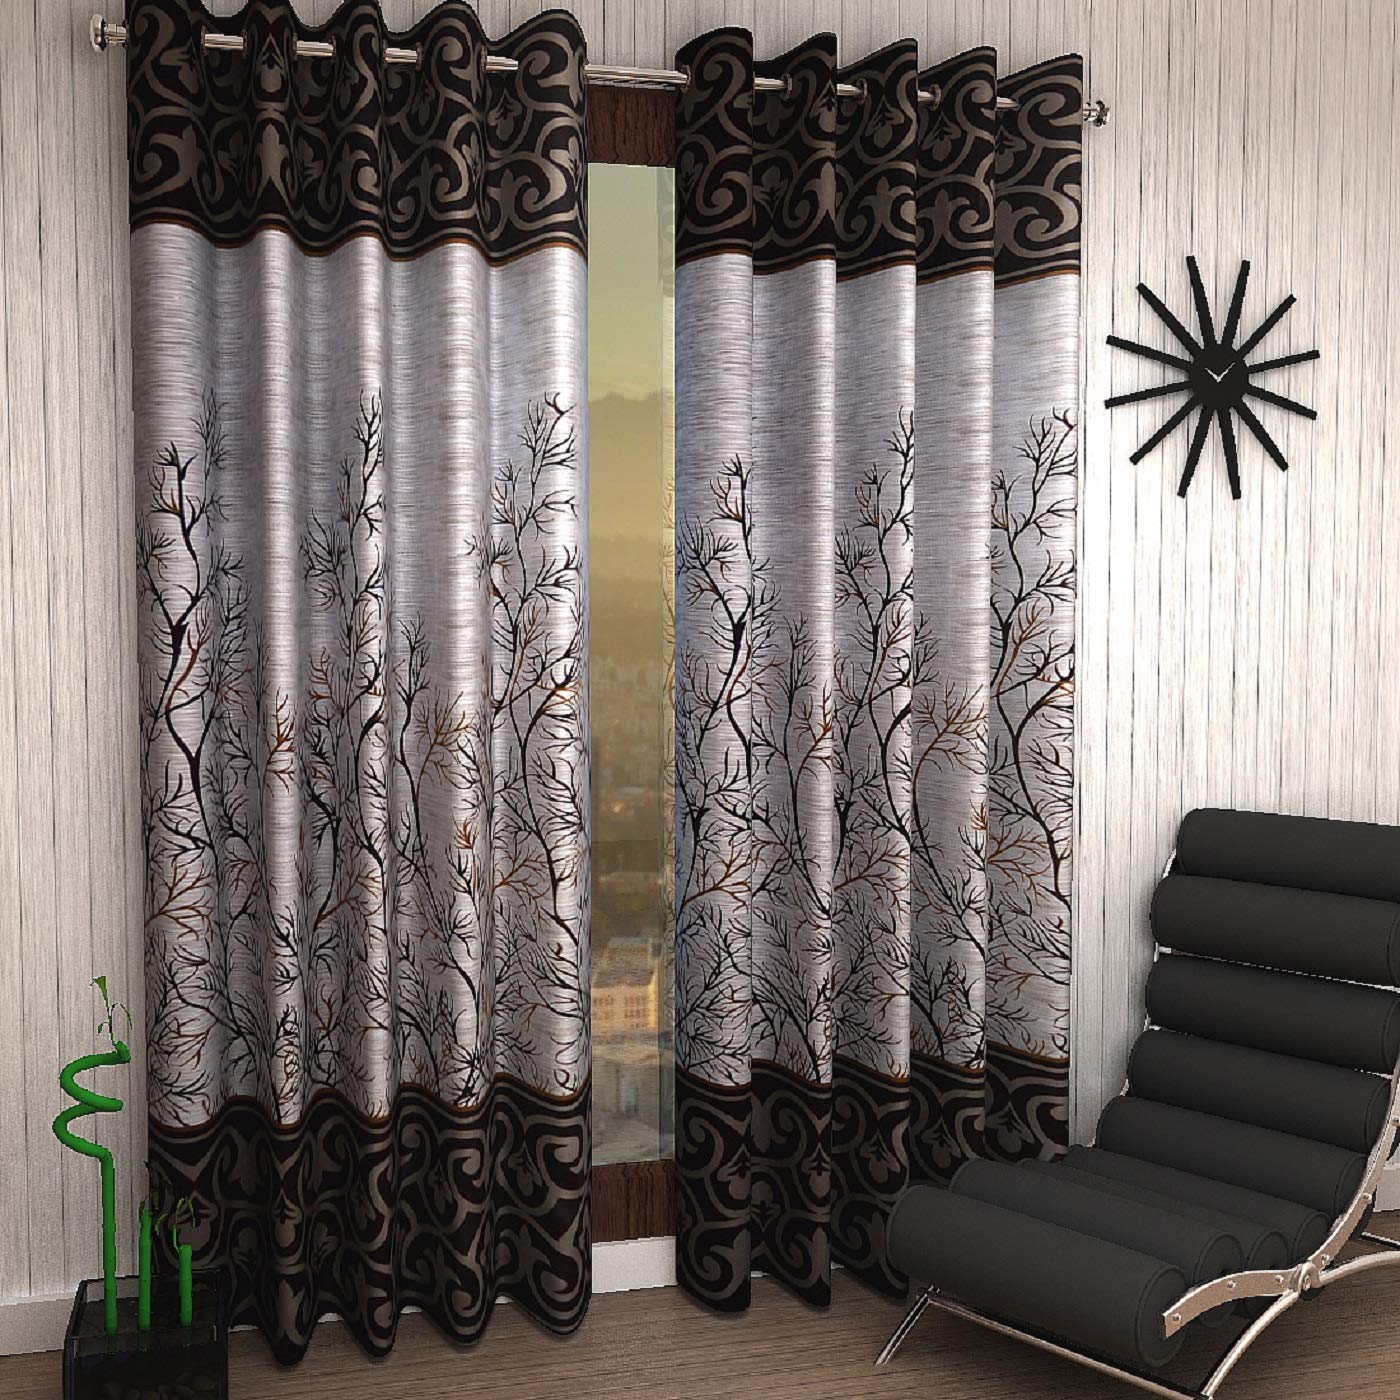 which curtain material is best